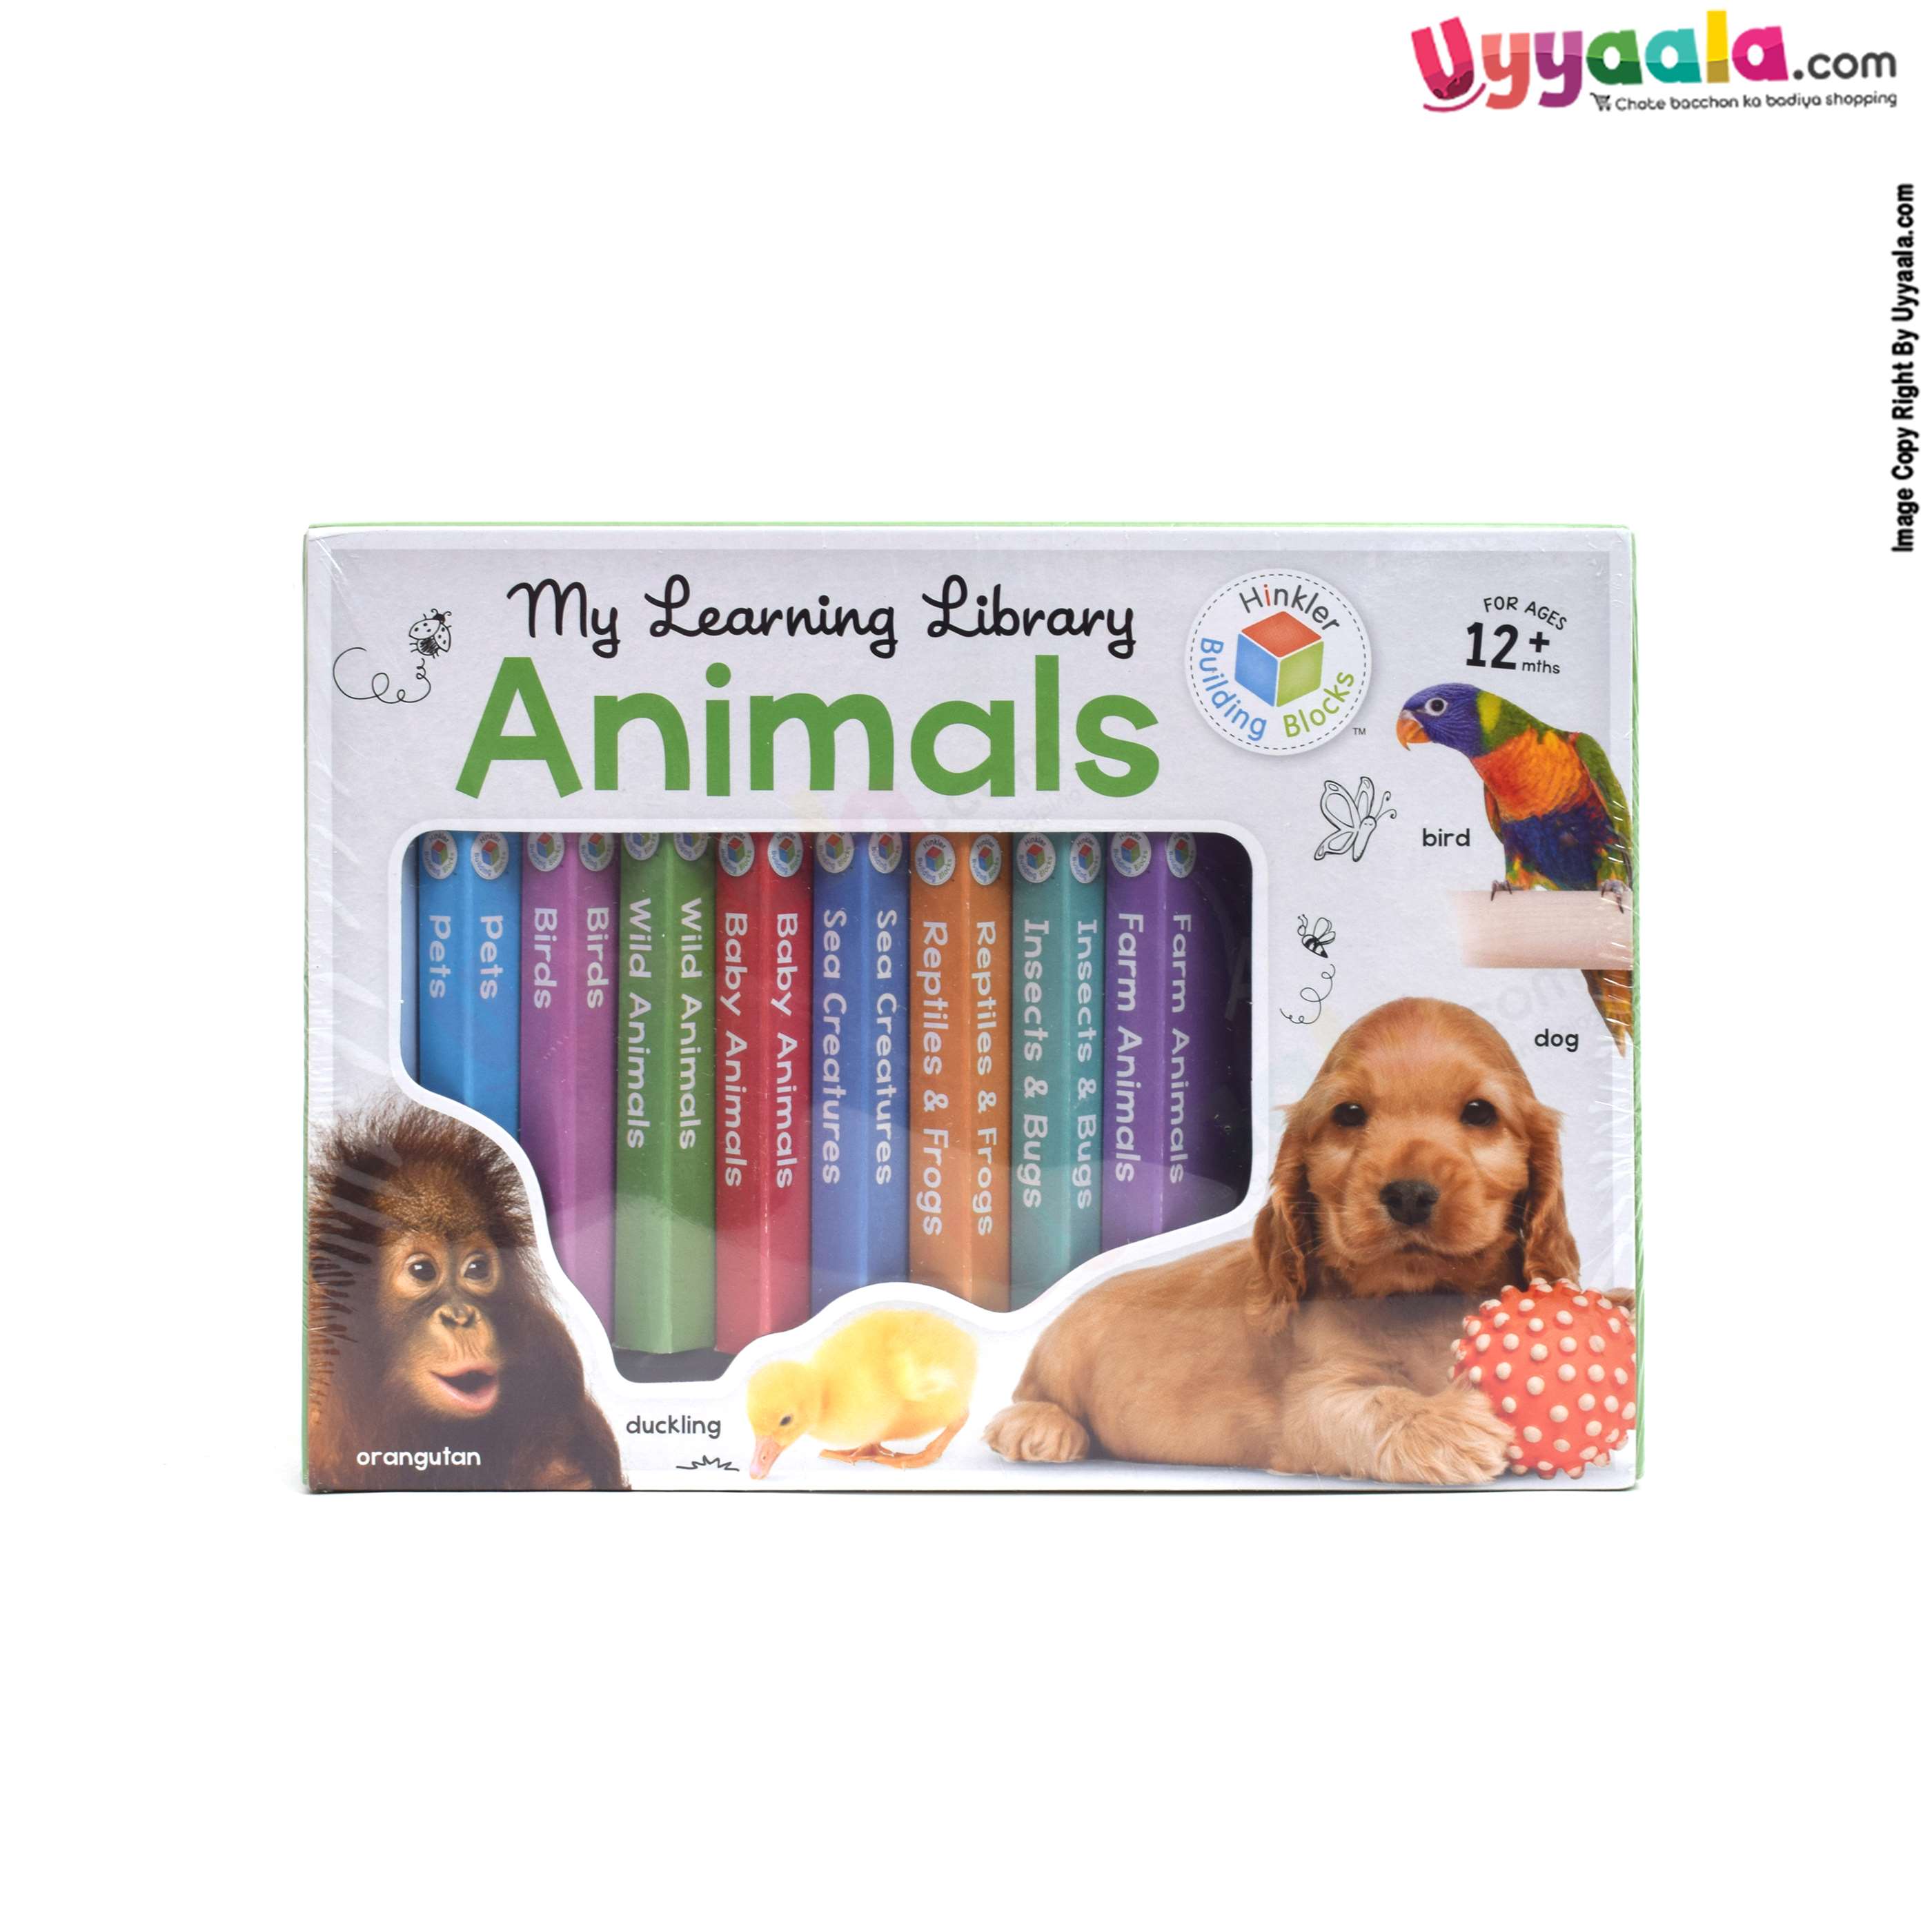 HINKLER Building blocks, my learning library - animals, pack of 8 - 8 volumes, 12 + months